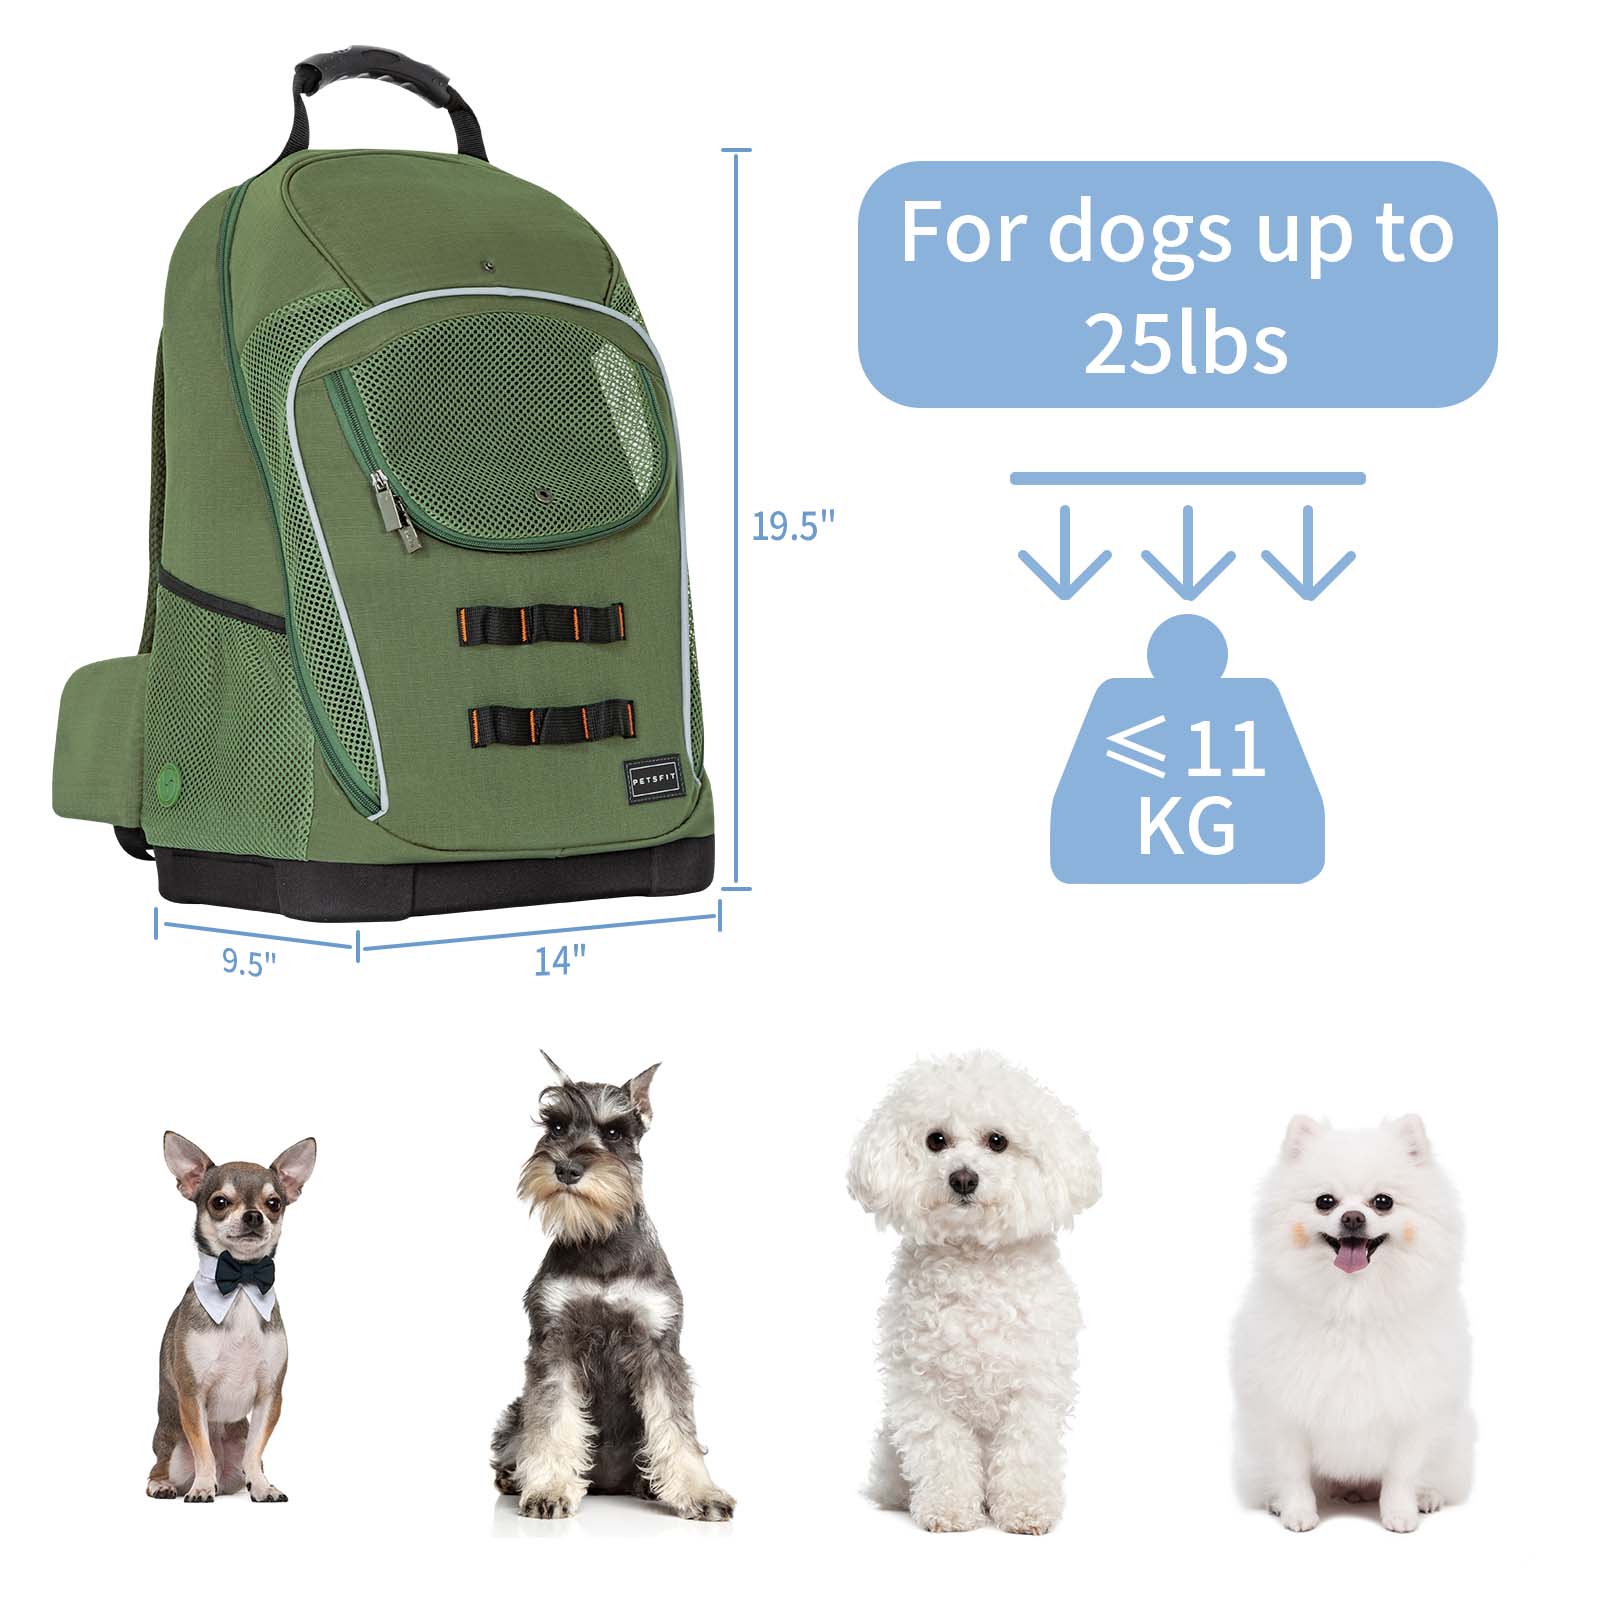 petsfit-pet-dog-carrier-latest-backpack-with-upgraded-weight-reduction-design-03